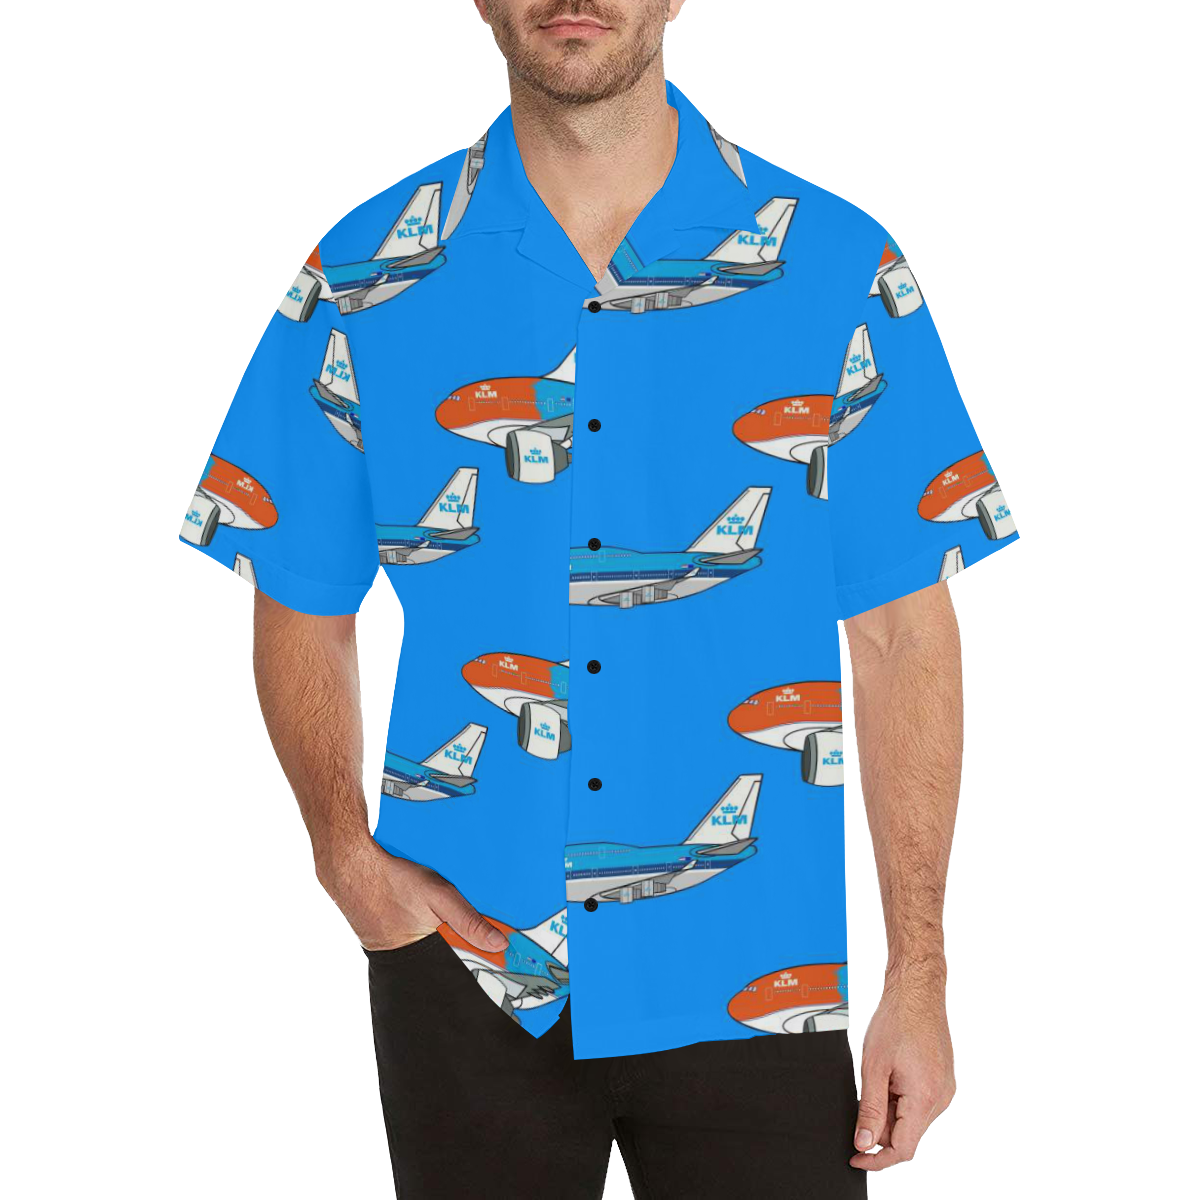 Front image of 747 light blue Hawaiian shirt.  Stylish Short Sleeves and notch lapel collar is visible. Boxy fitting is showcased.